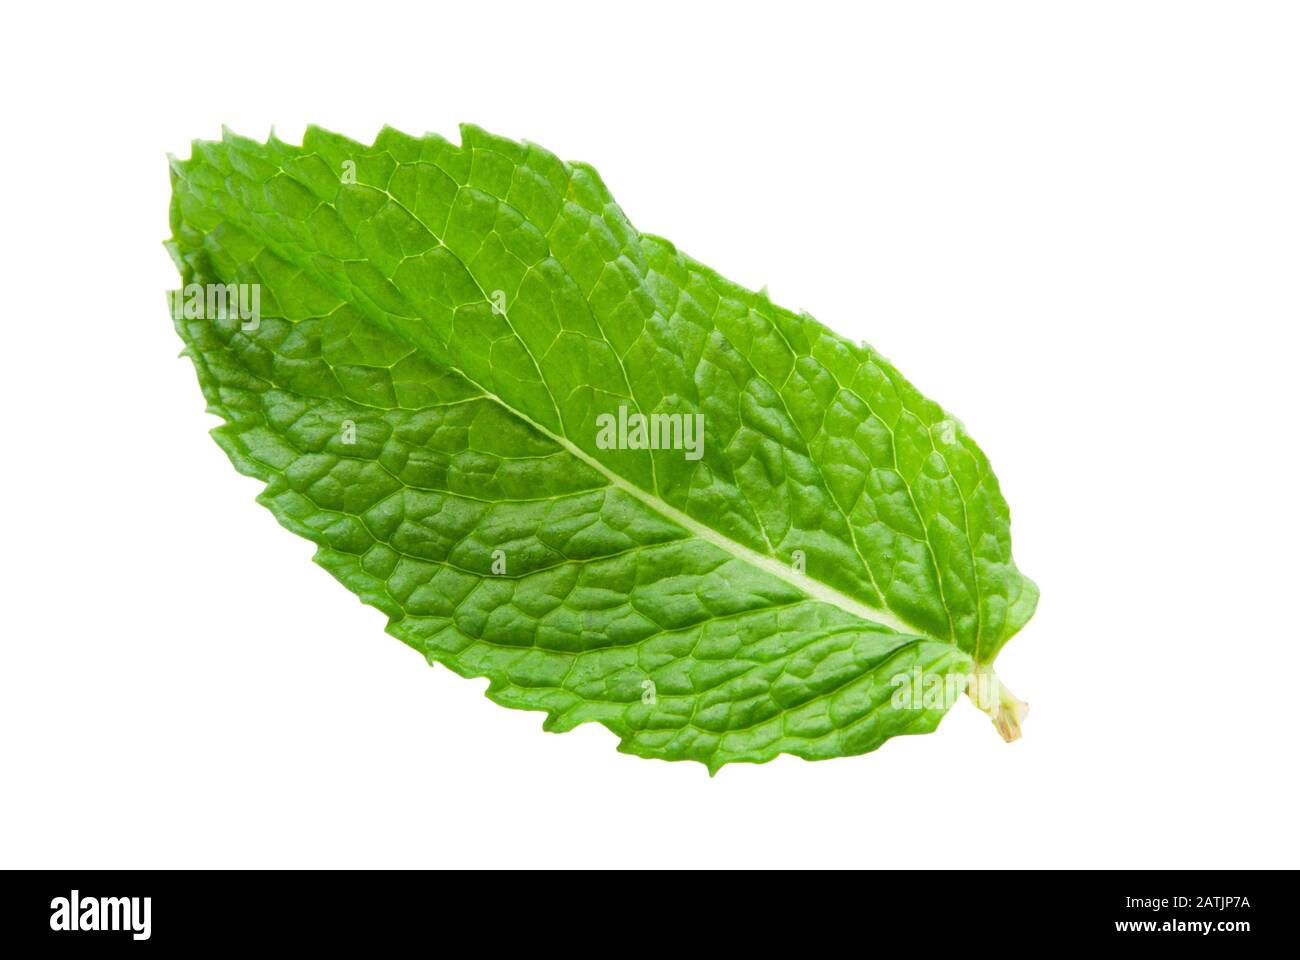 one green colored fresh mint leaf with a stem on an isolated white background. Stock Photo